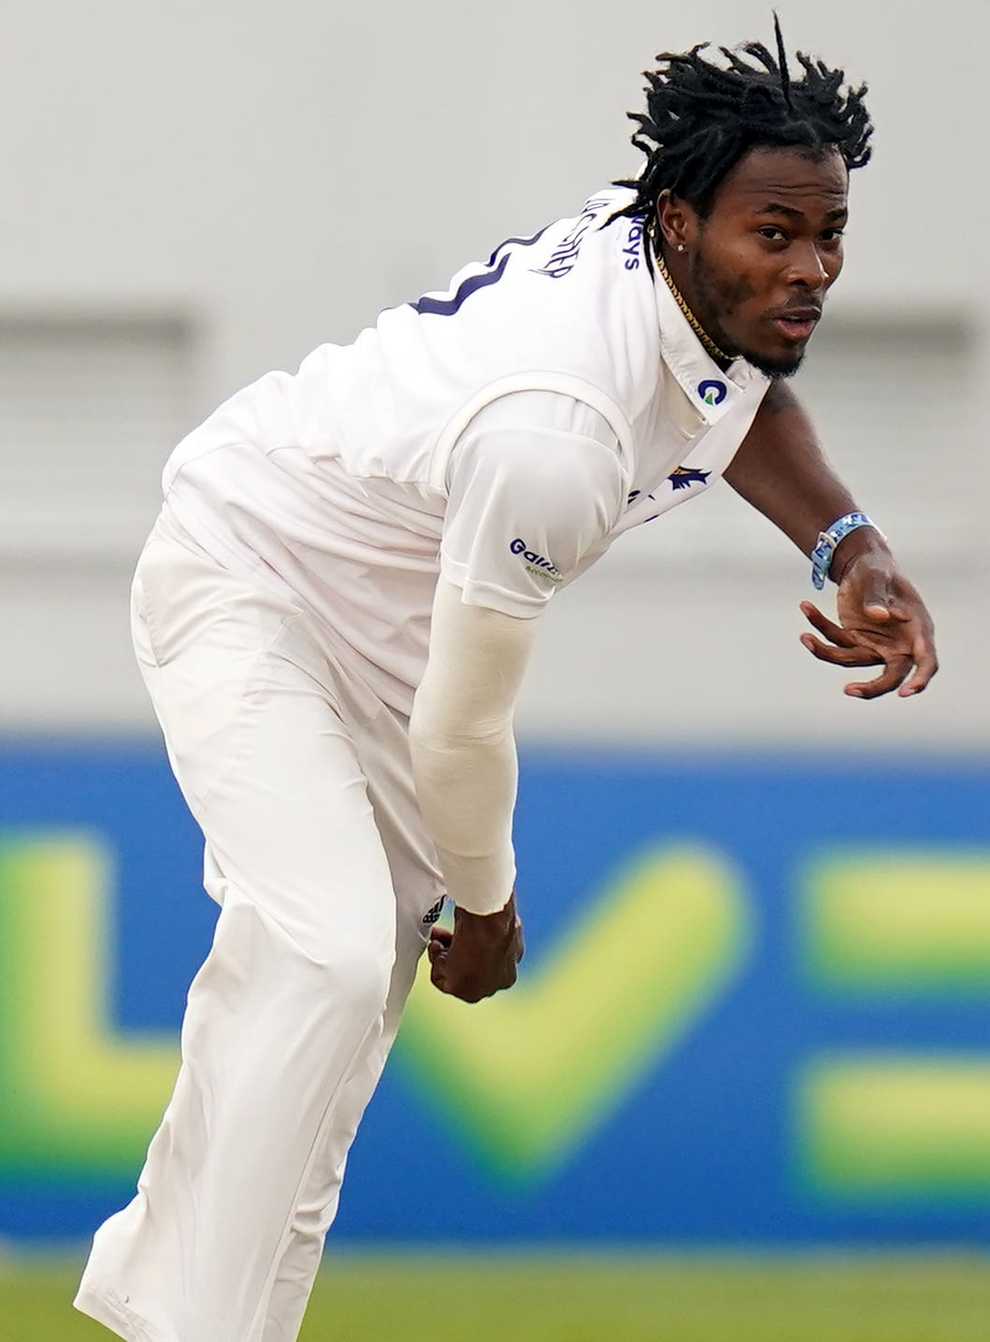 Jofra Archer has enjoyed his red-ball return with England (Adam Davy/PA)